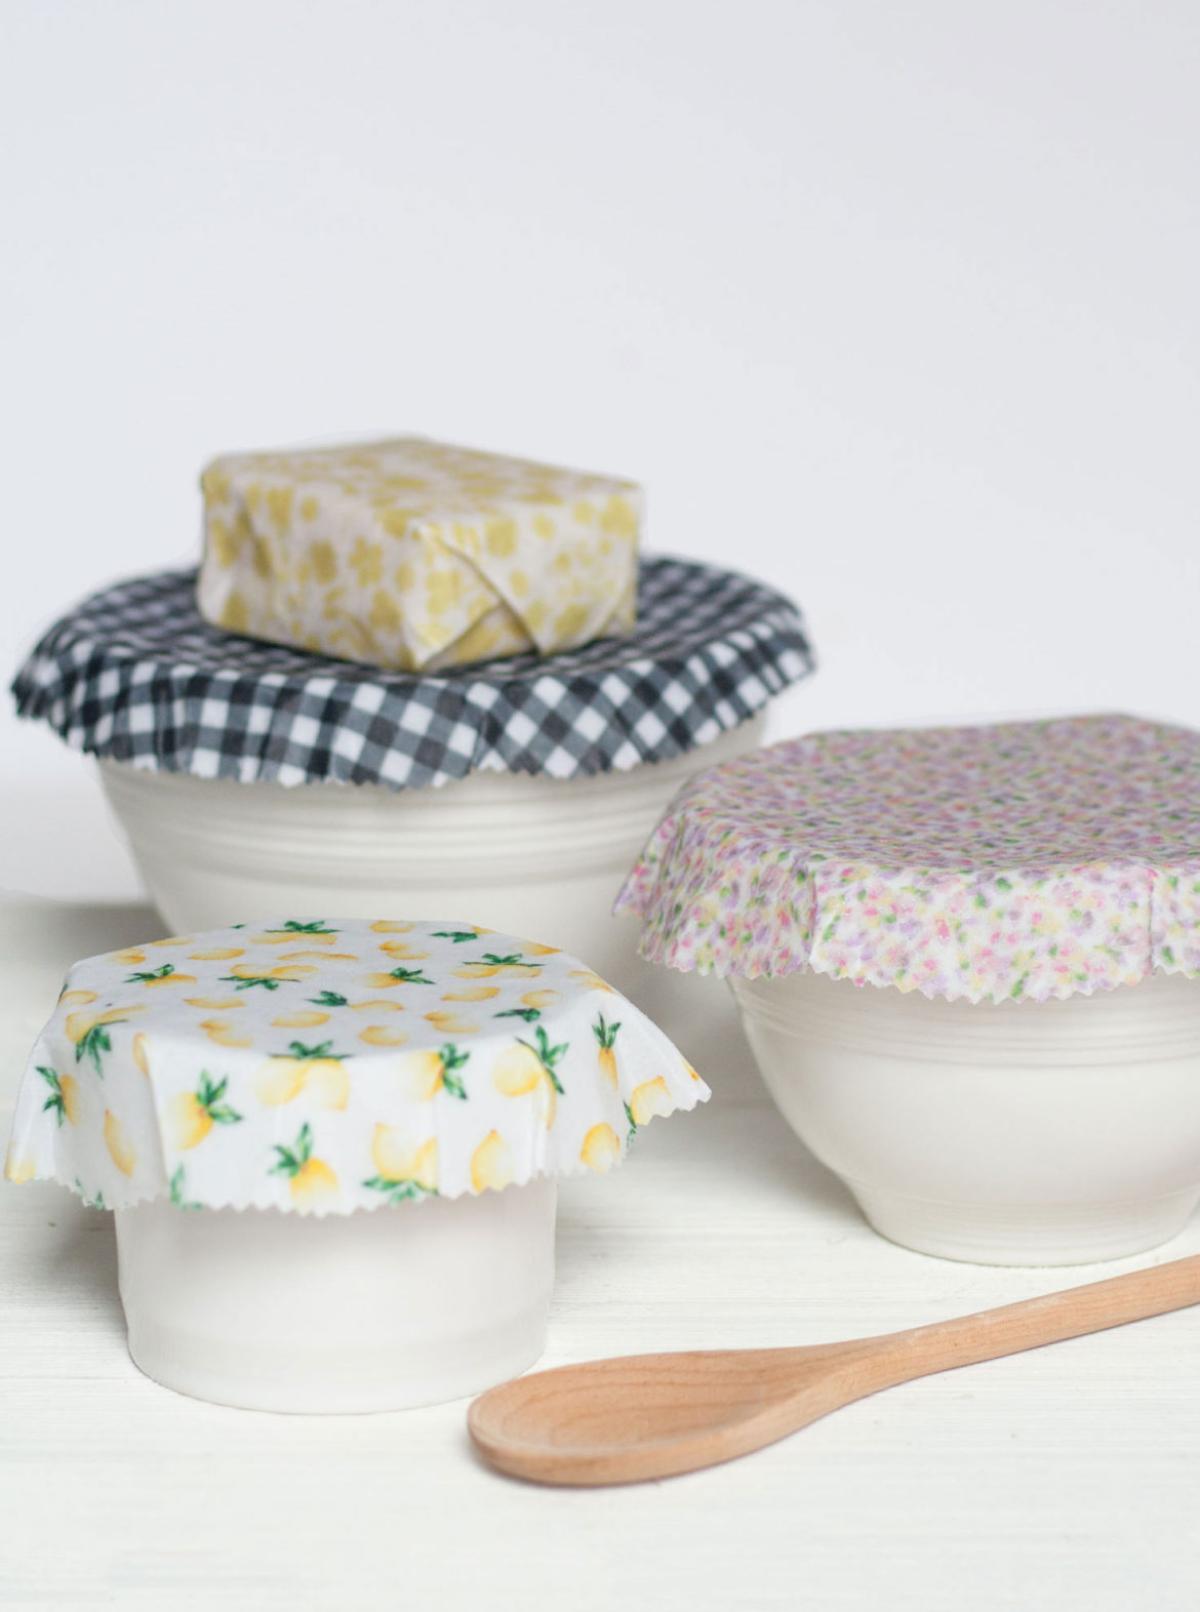 DIY Beeswax Bowl Covers